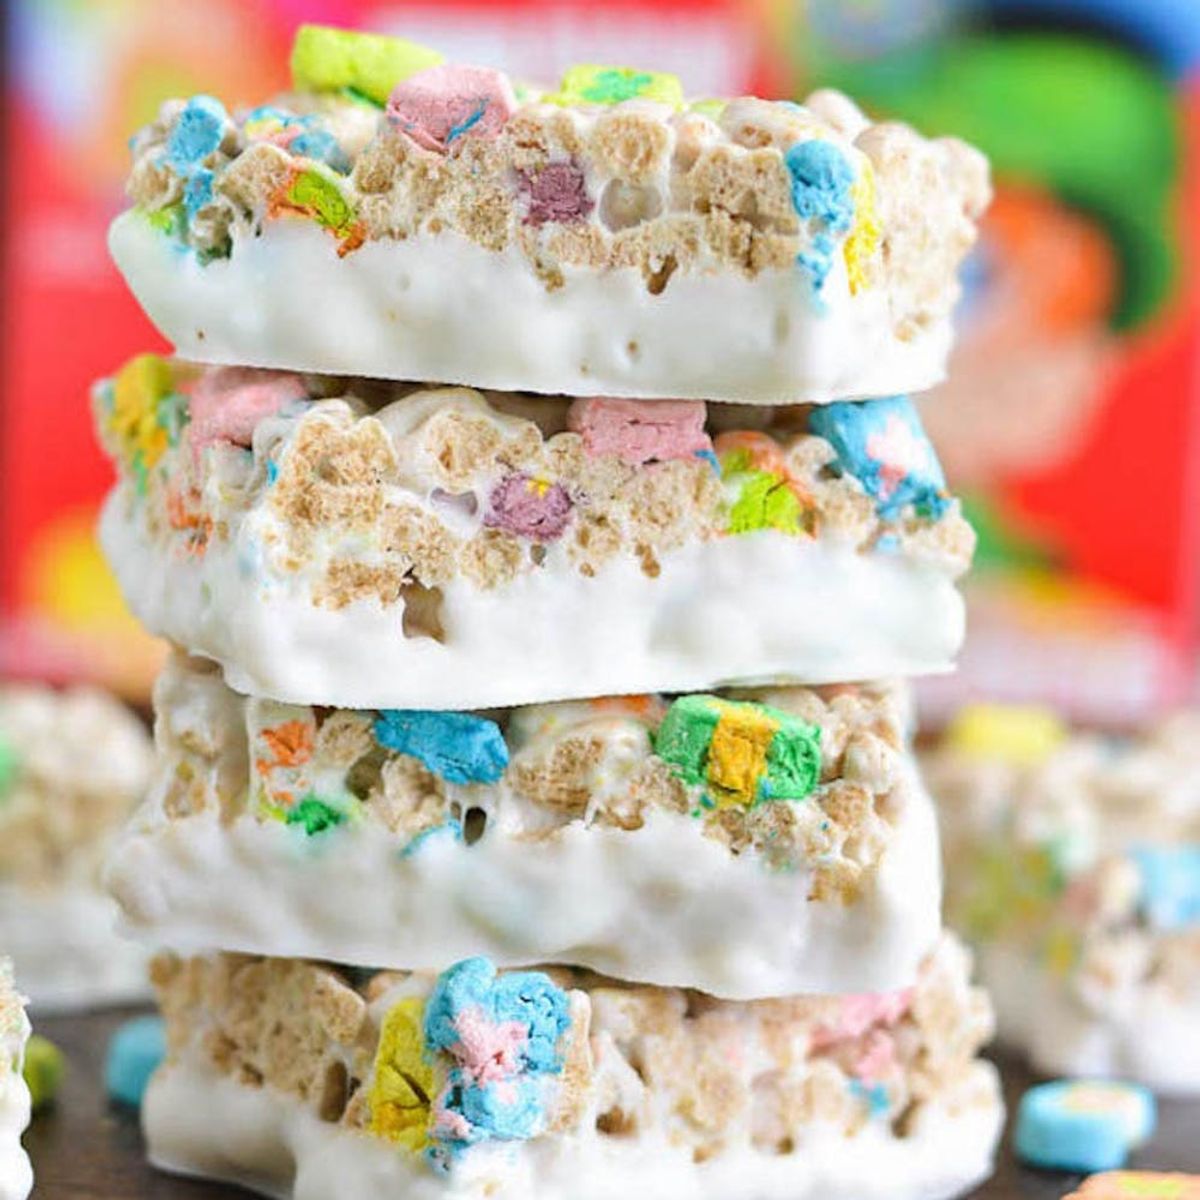 Stacked picture of a lucky charms cereal bar.